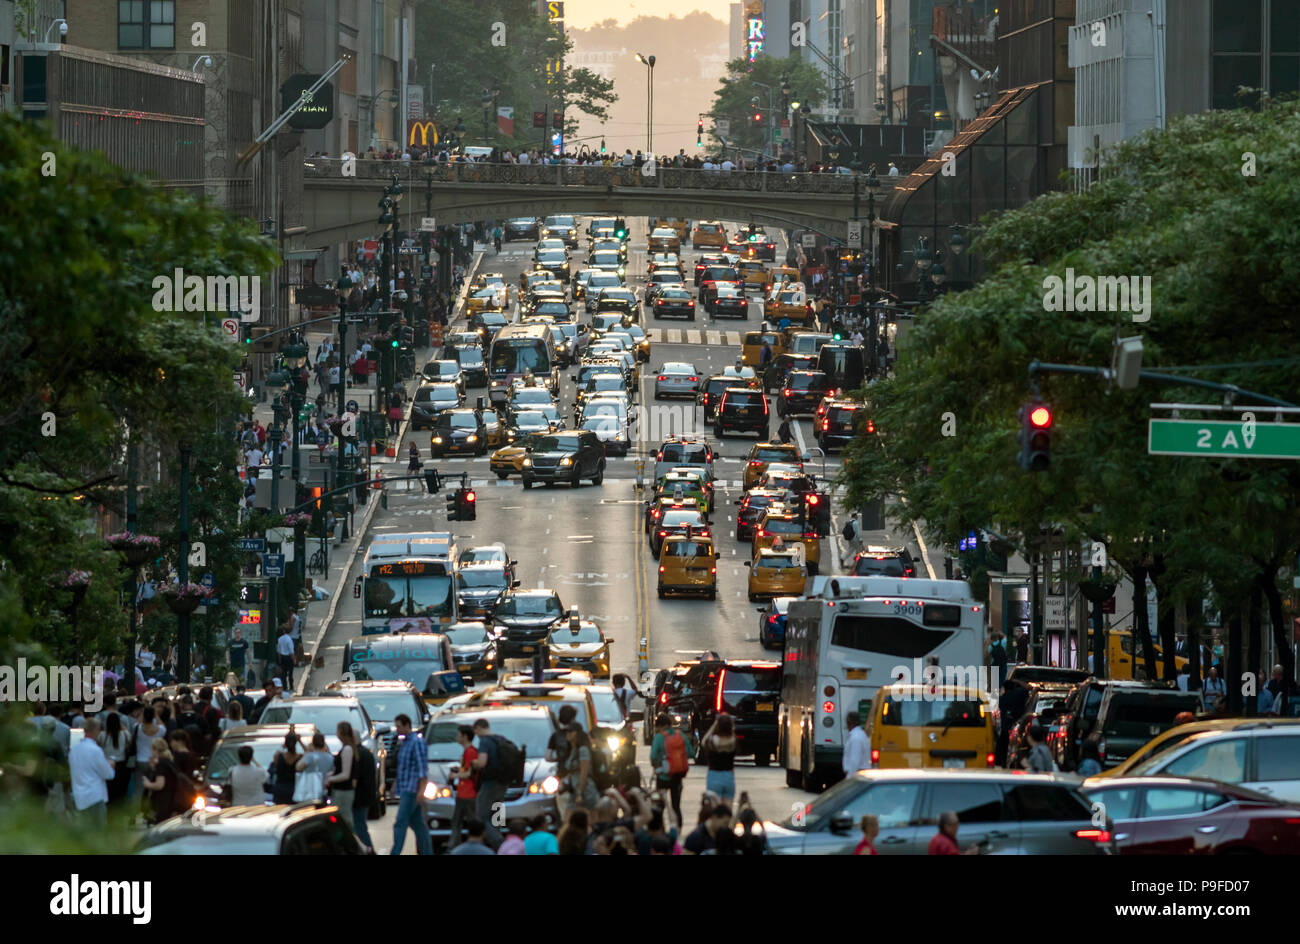 Congestion of pedestrians and cars in Manhattan, New York City. Stock Photo